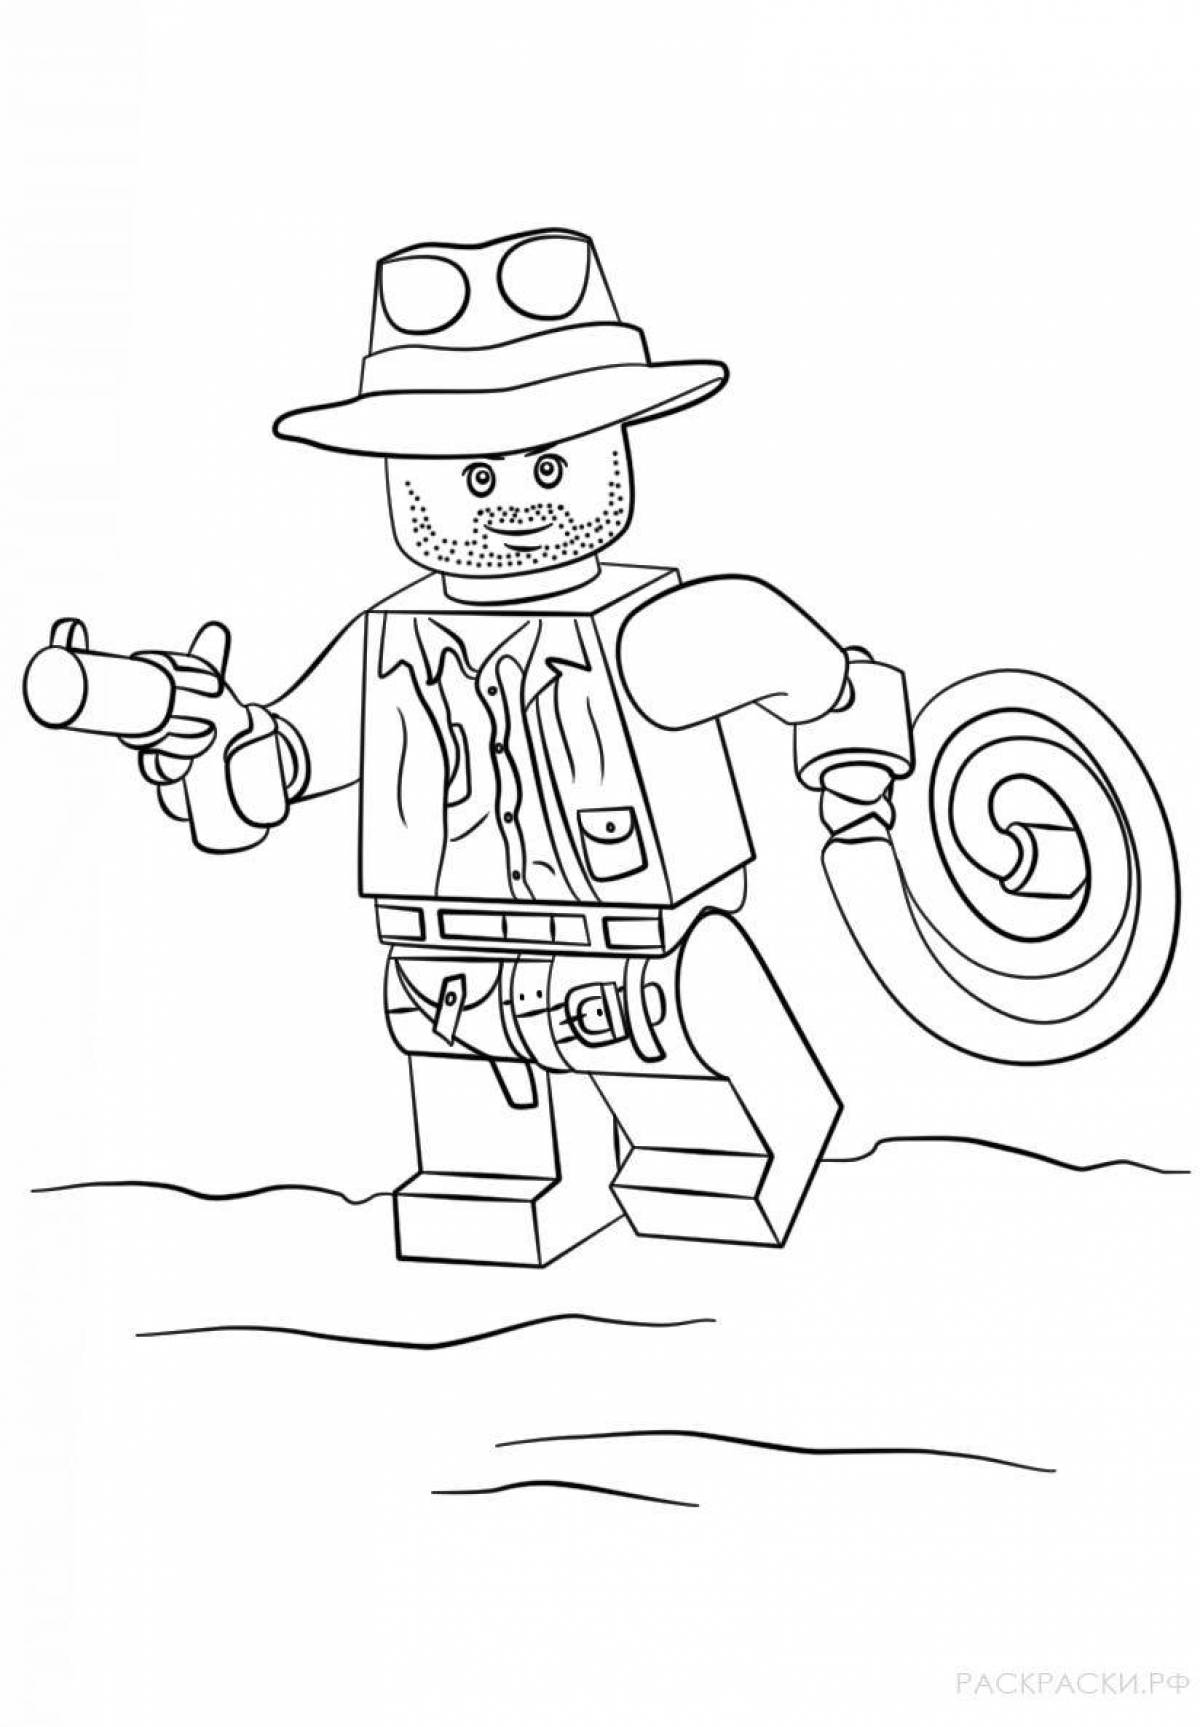 Colourful lego toy soldiers coloring book